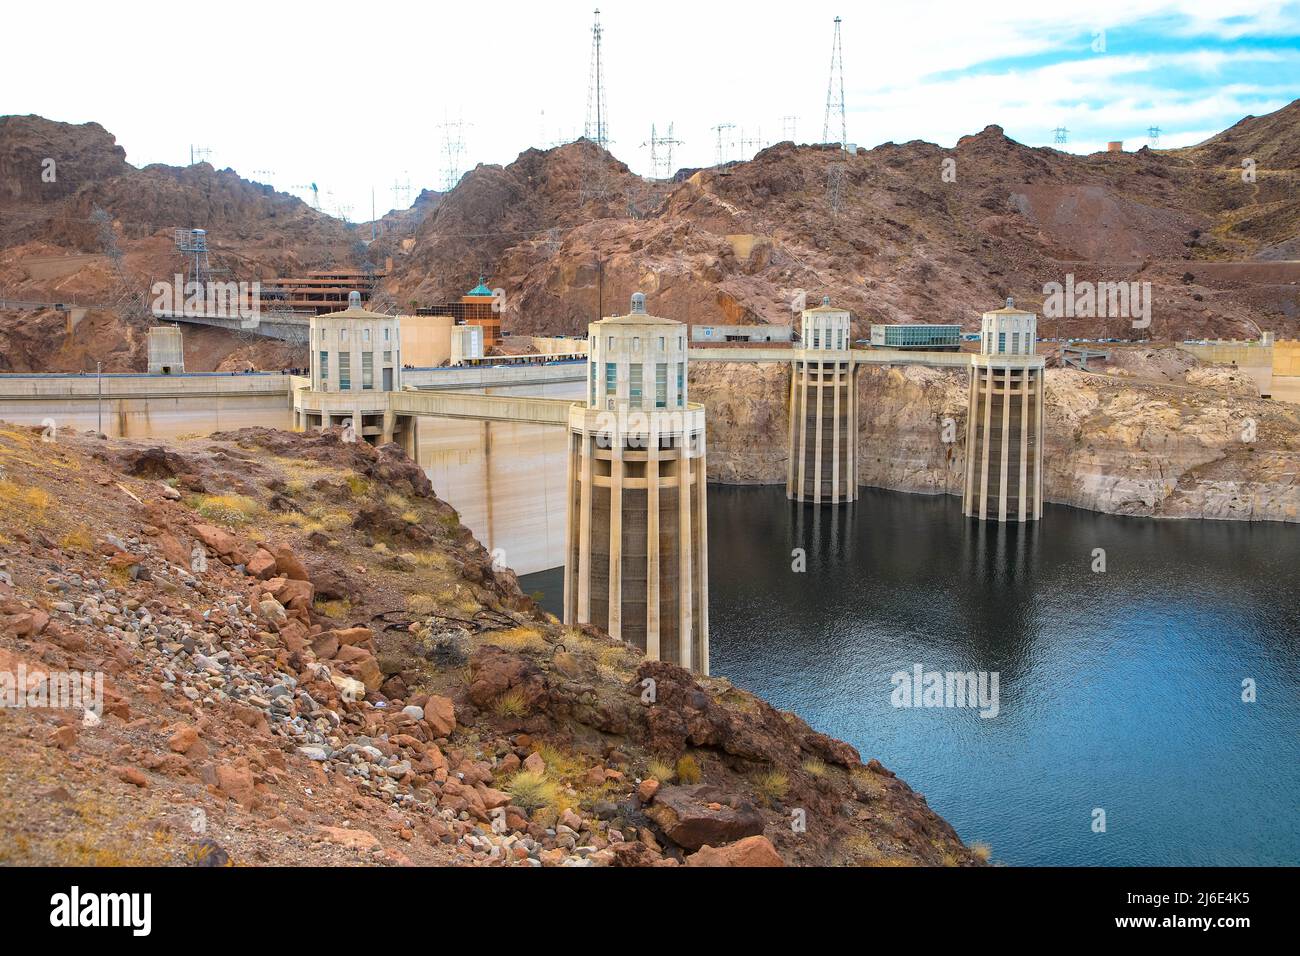 Penstocks, or water intake towers, in Lake Mead at Hoover Dam on the Colorado River near, Nevada. Arizona United States Stock Photo